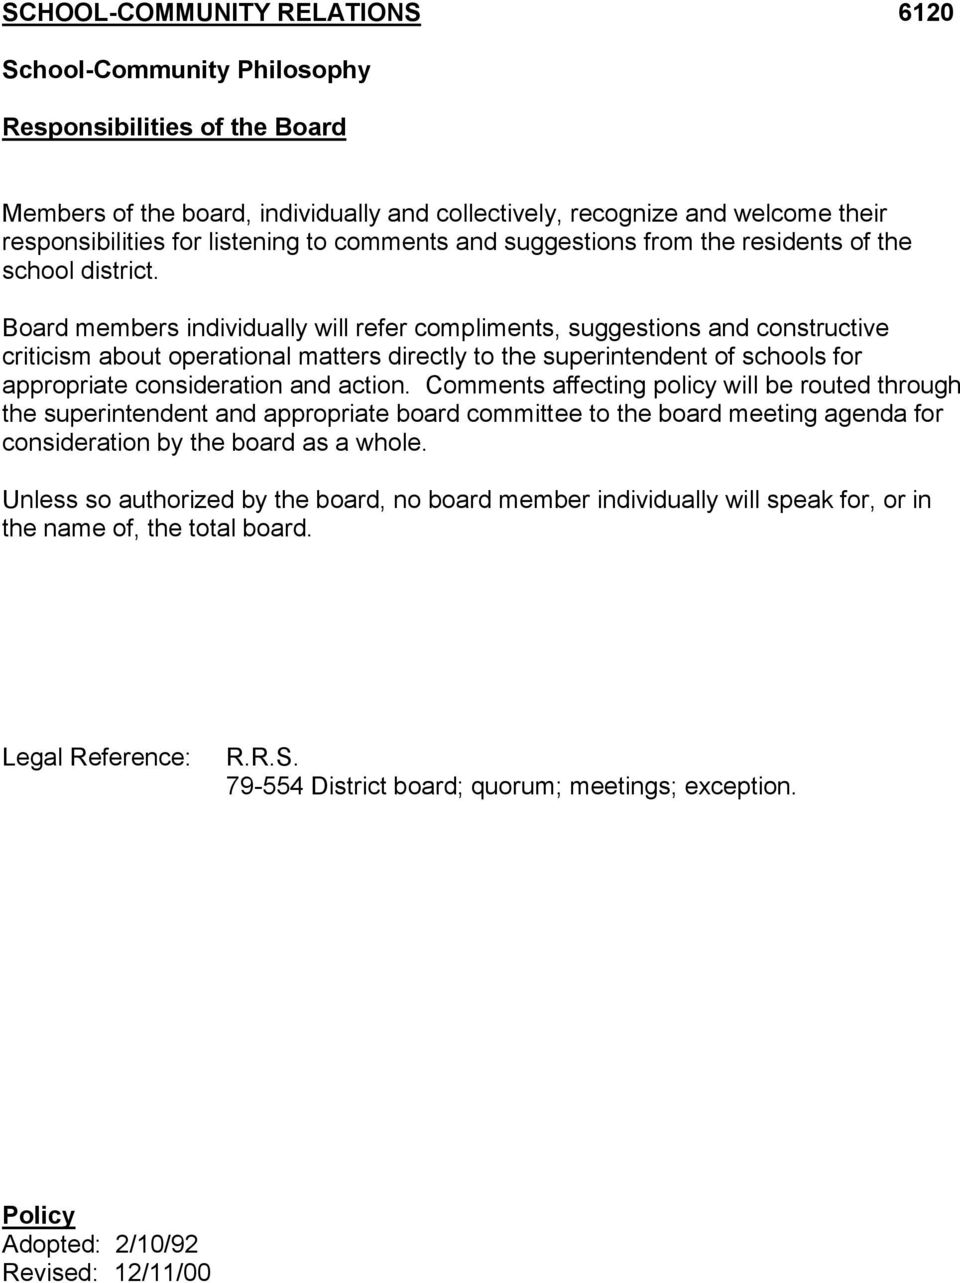 Board members individually will refer compliments, suggestions and constructive criticism about operational matters directly to the superintendent of schools for appropriate consideration and action.